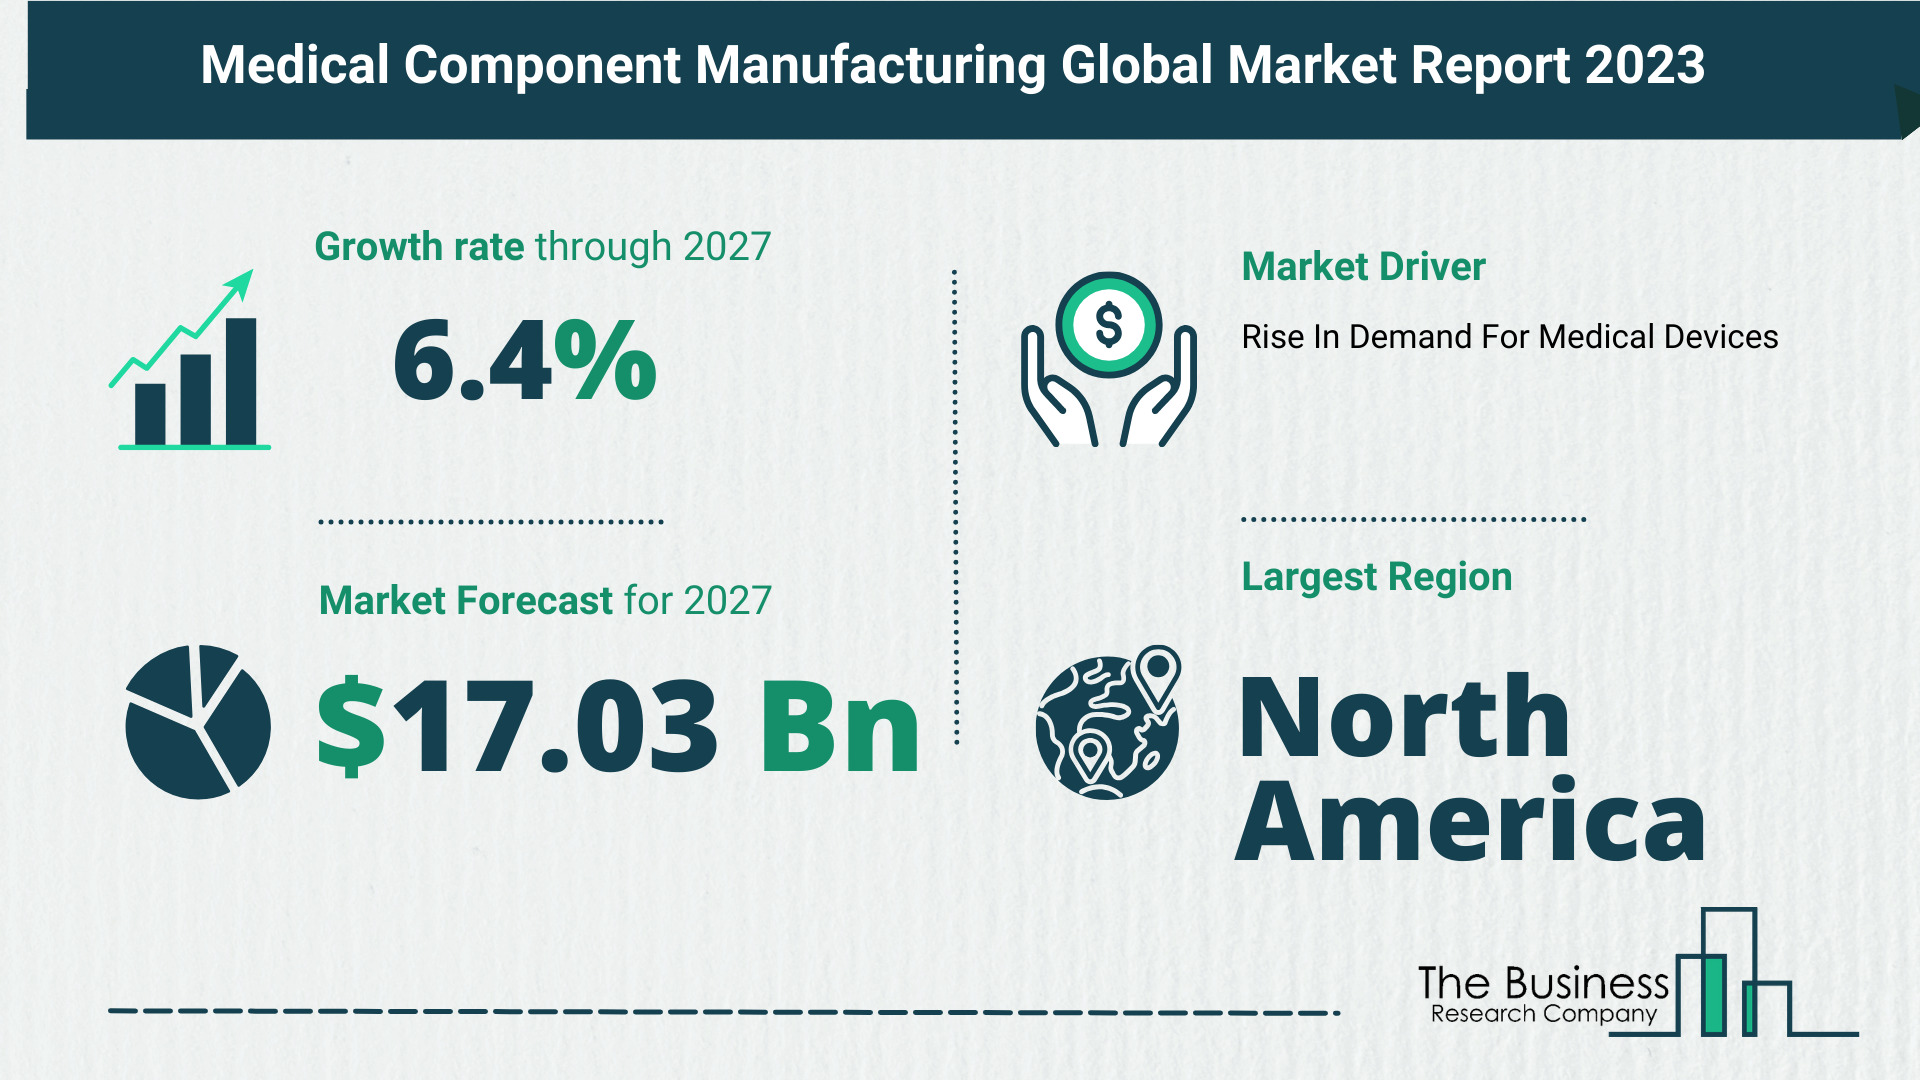 Global Medical Component Manufacturing Market Analysis: Estimated Market Size And Growth Rate